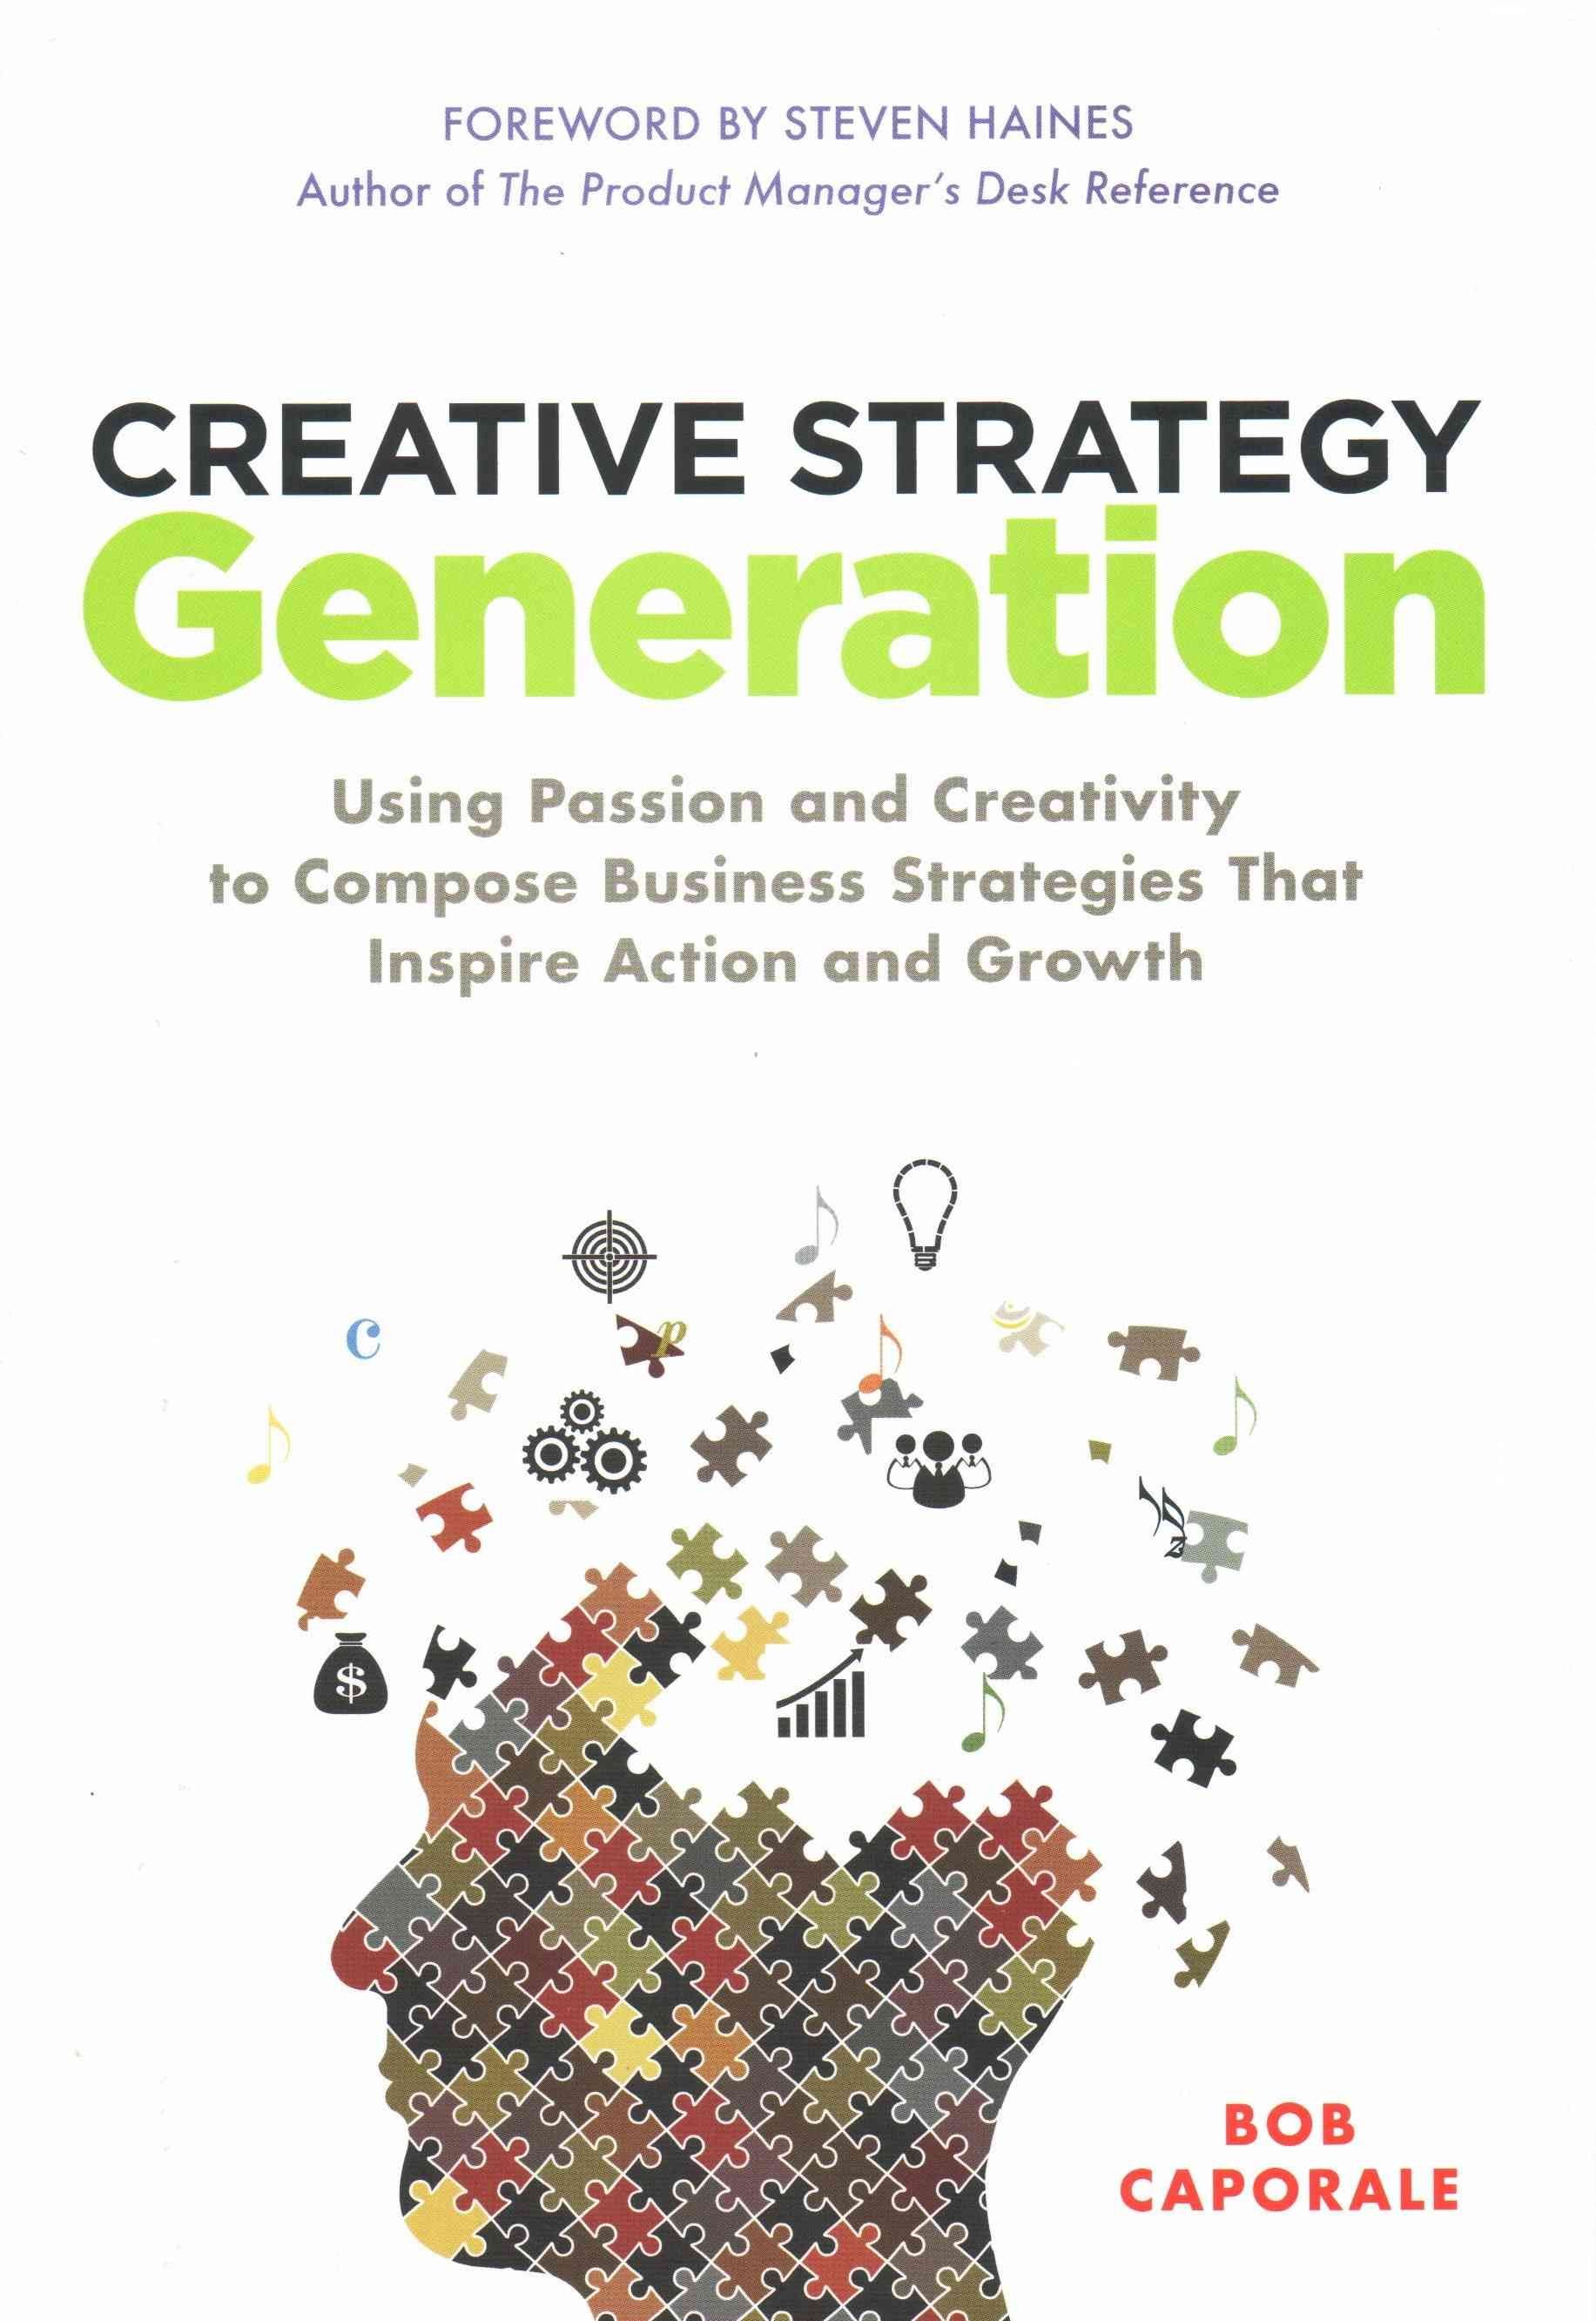 Creative Strategy Generation: Using Passion and Creativity to Compose Business Strategies That Inspire Action and Growth